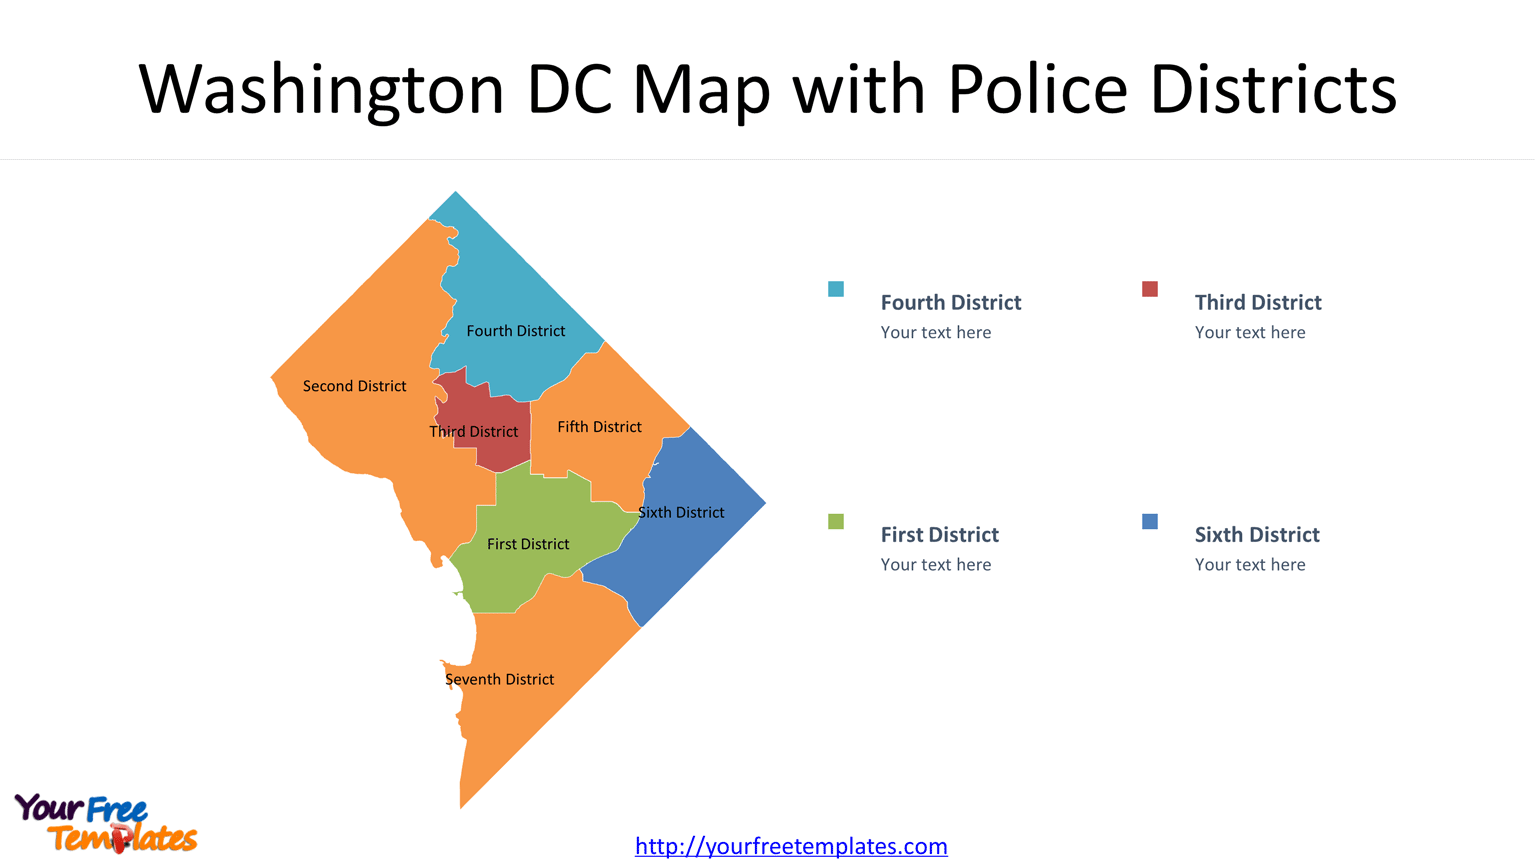 Washington DC Map with 7 Police Districts